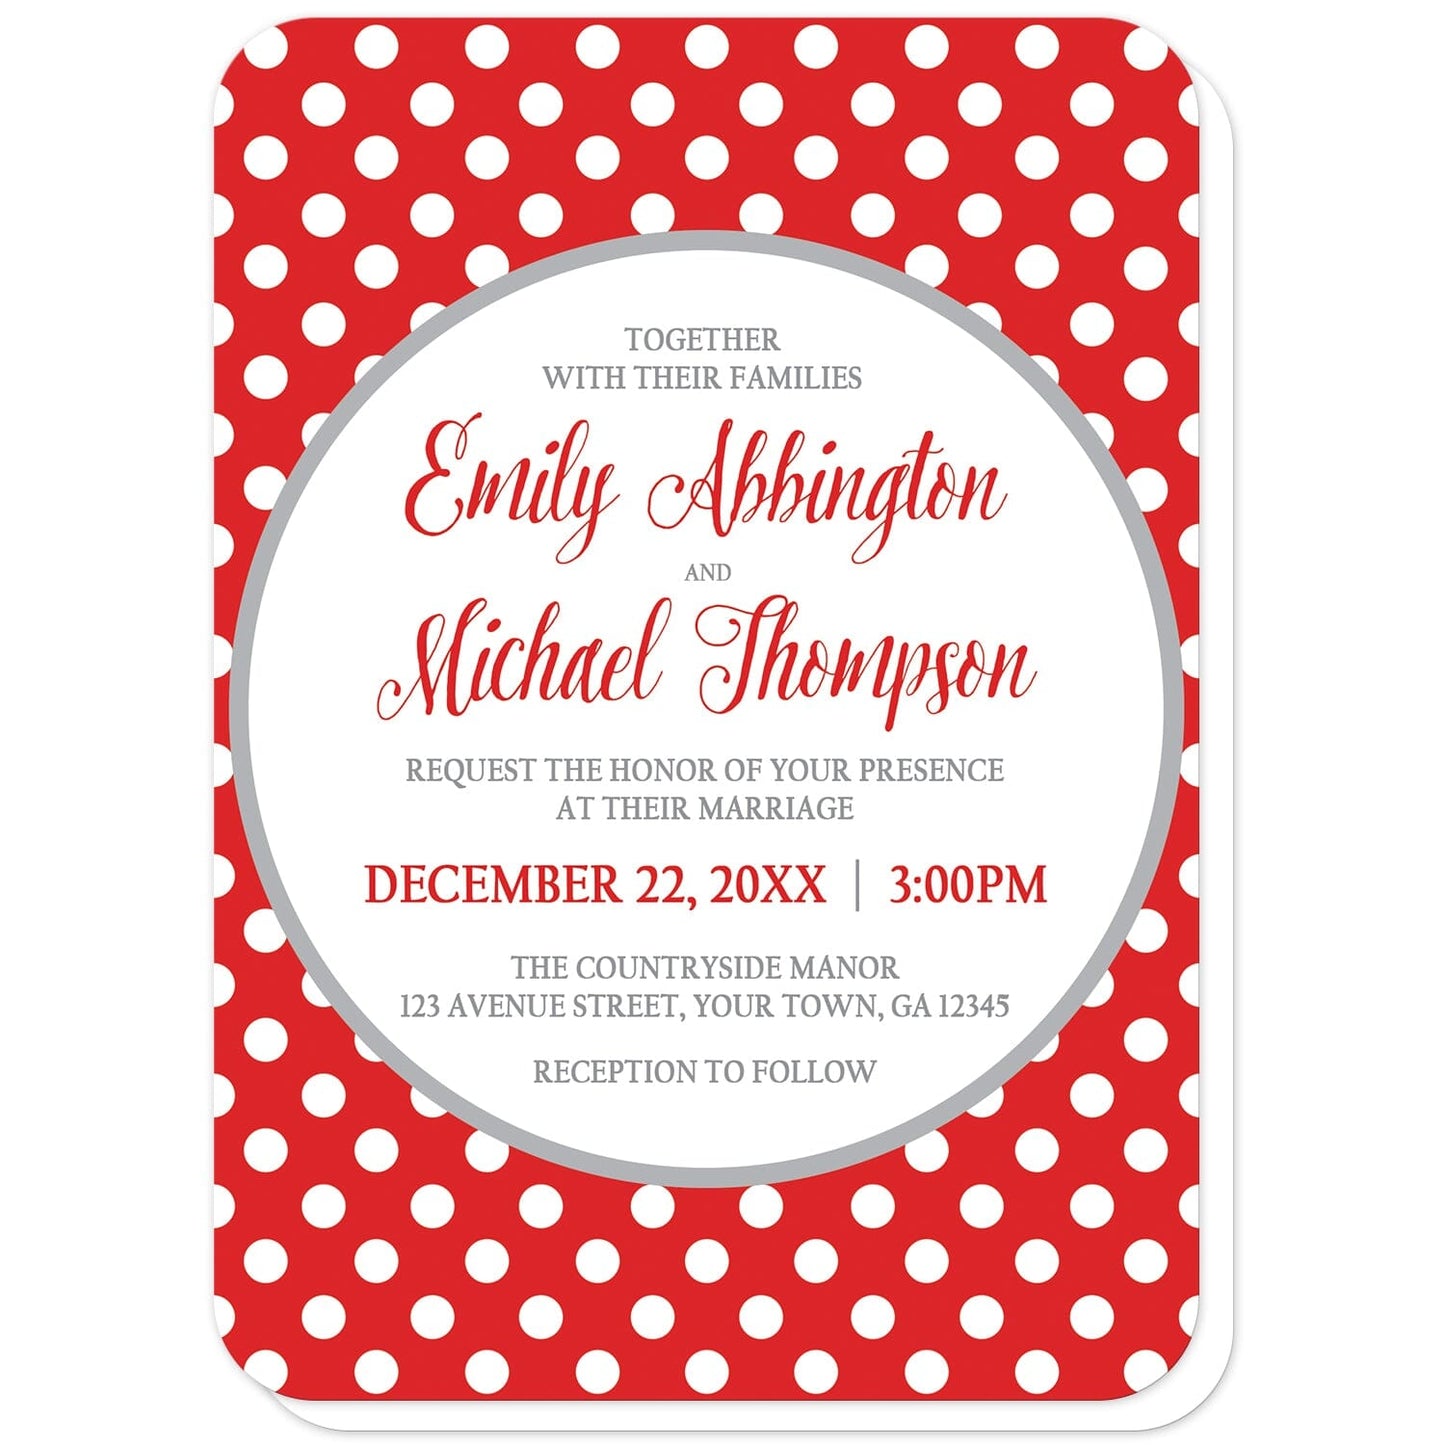 Gray and Red Polka Dot Wedding Invitations (with rounded corners) at Artistically Invited. Gray and red polka dot wedding invitations with your personalized marriage celebration details custom printed in red and gray inside a white circle outlined in light gray, over a red polka dot pattern with white polka dots over red.